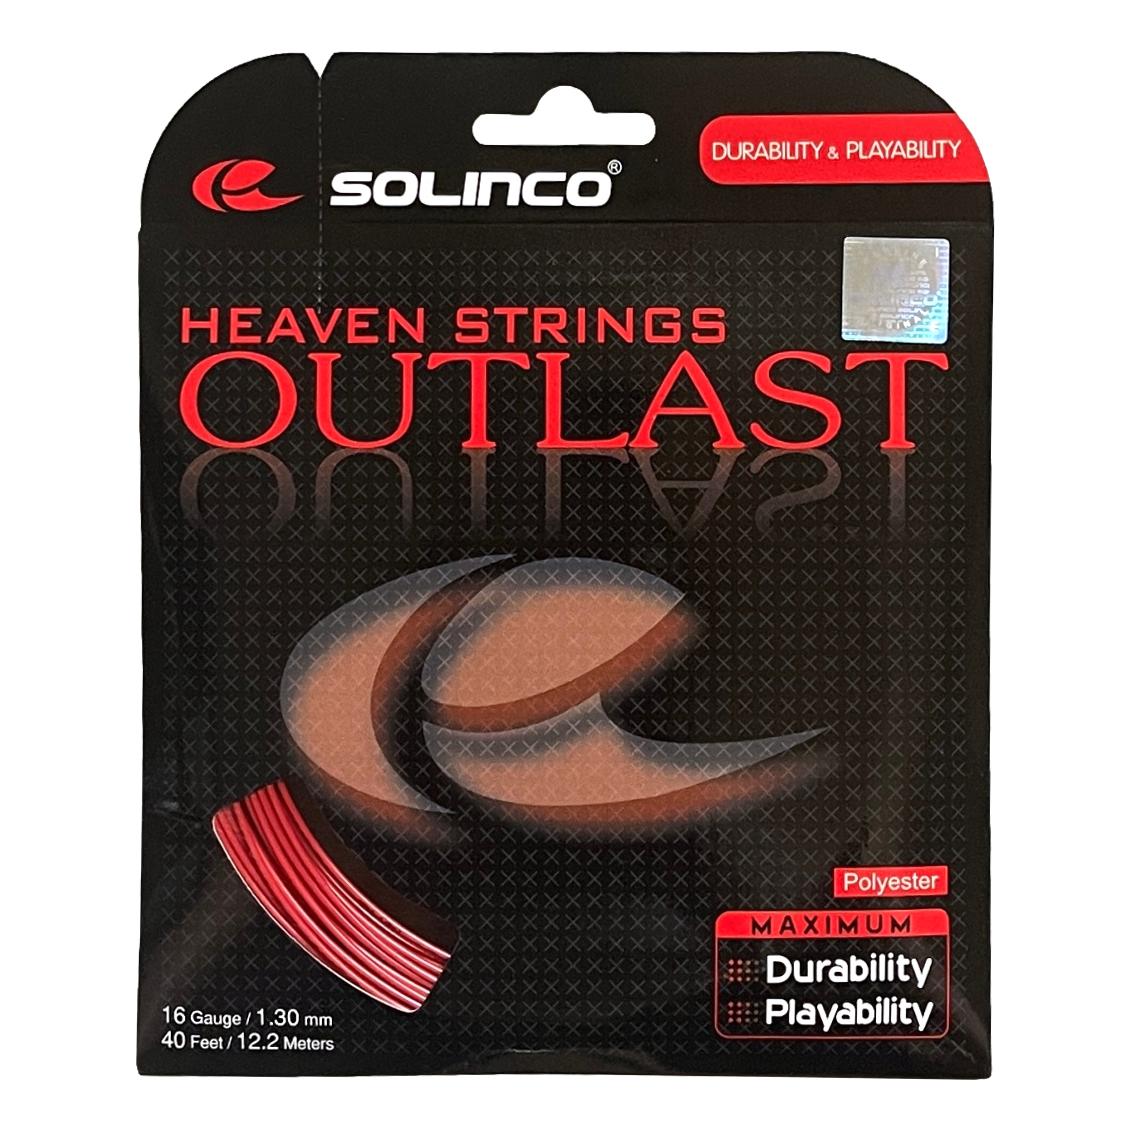 Solinco Outlast 16 Tennis String - Unmatched Performance and Durability